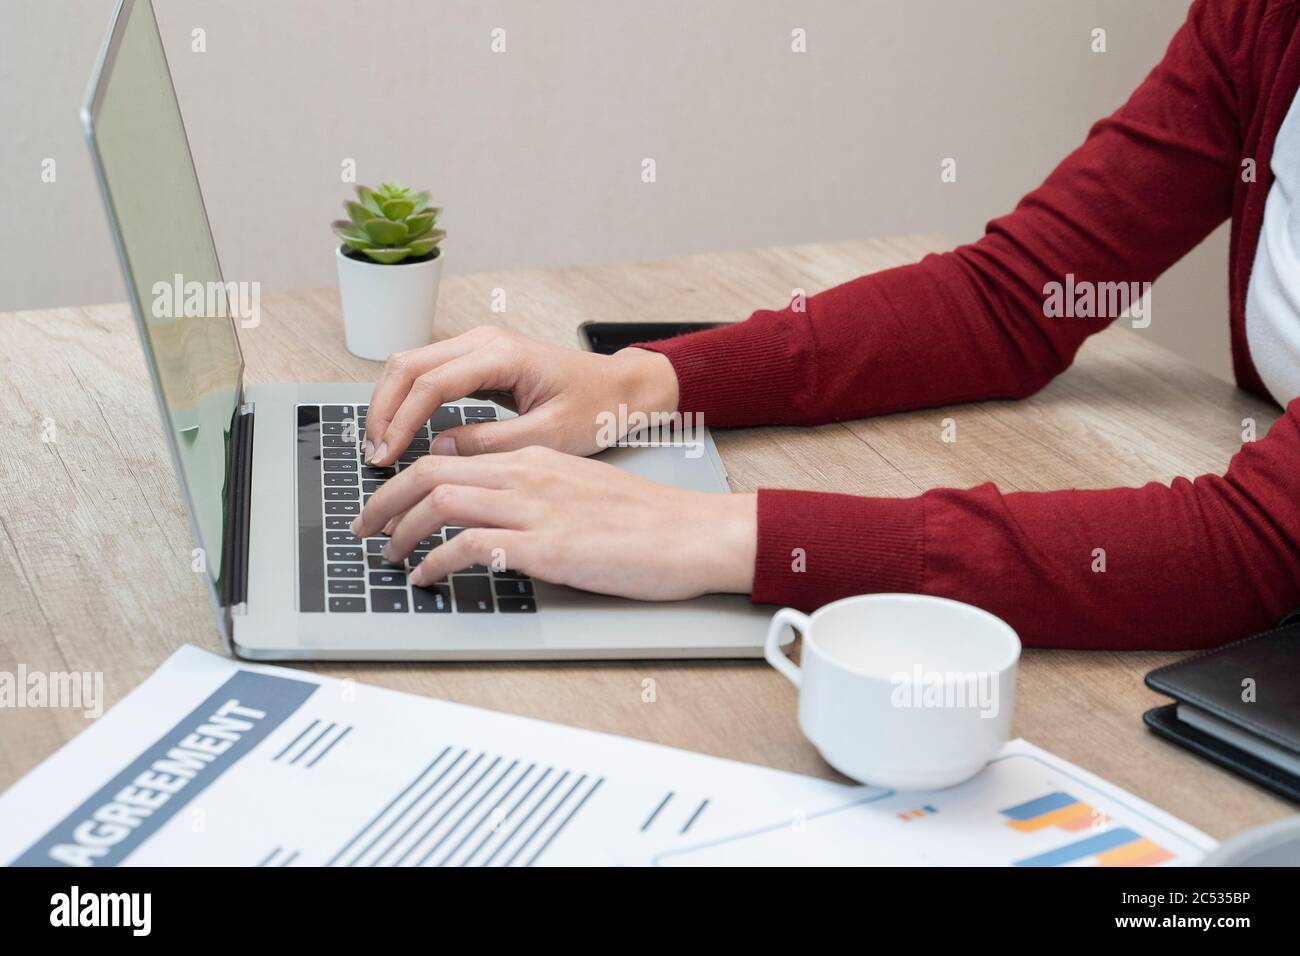 Work from home, new normal. Stock Photo